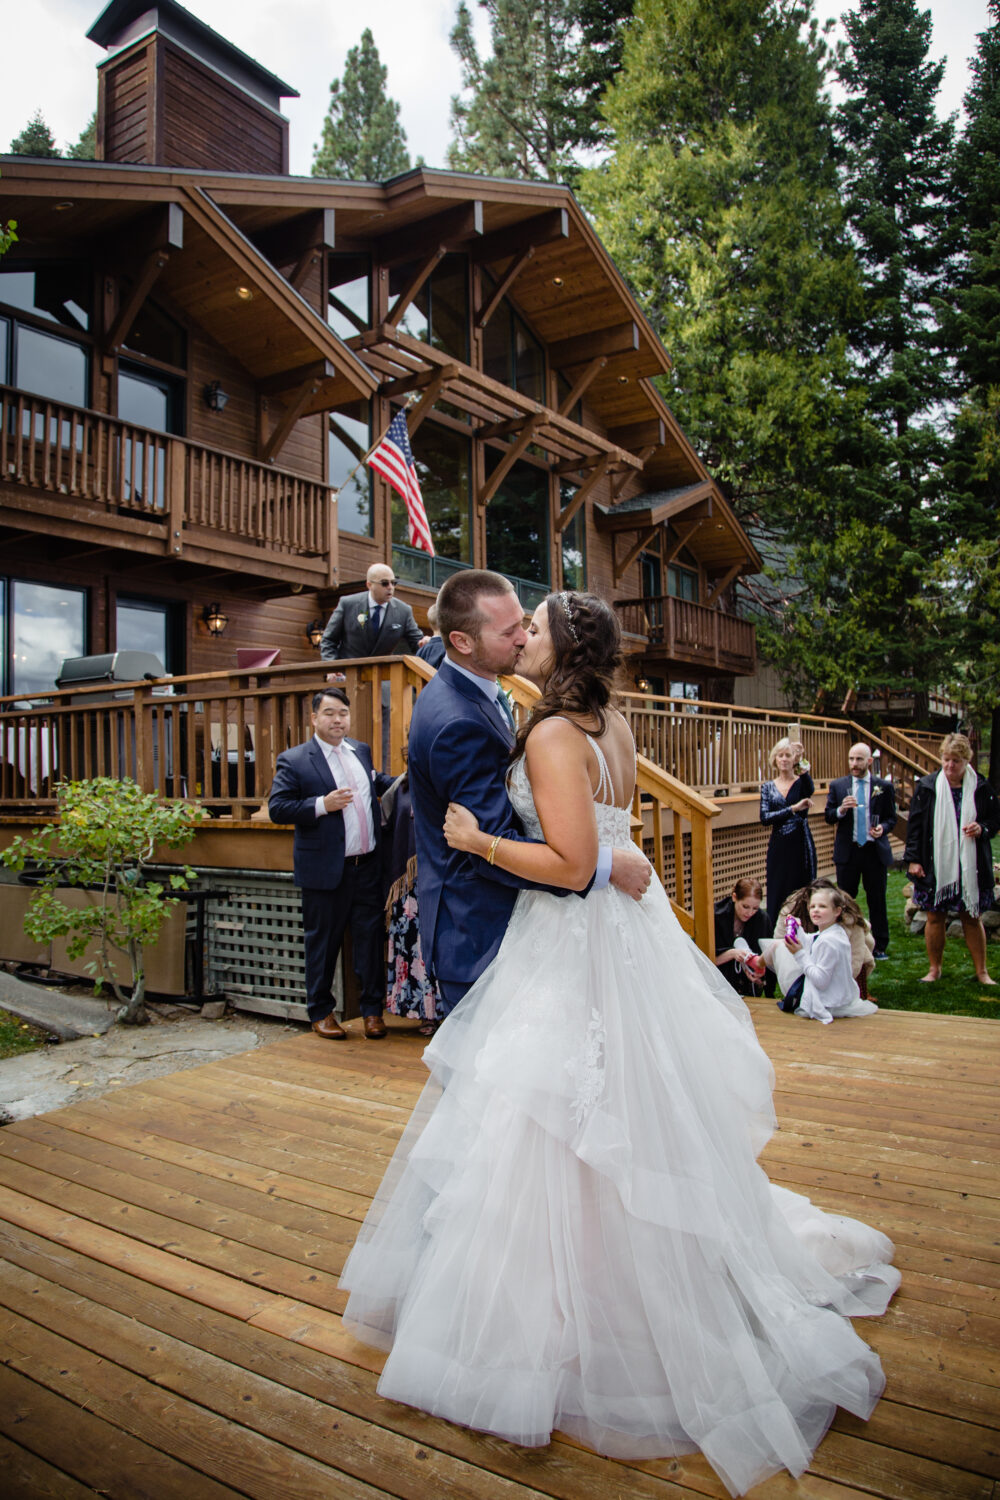 A bride and groom perform their first dance on a wooden deck.